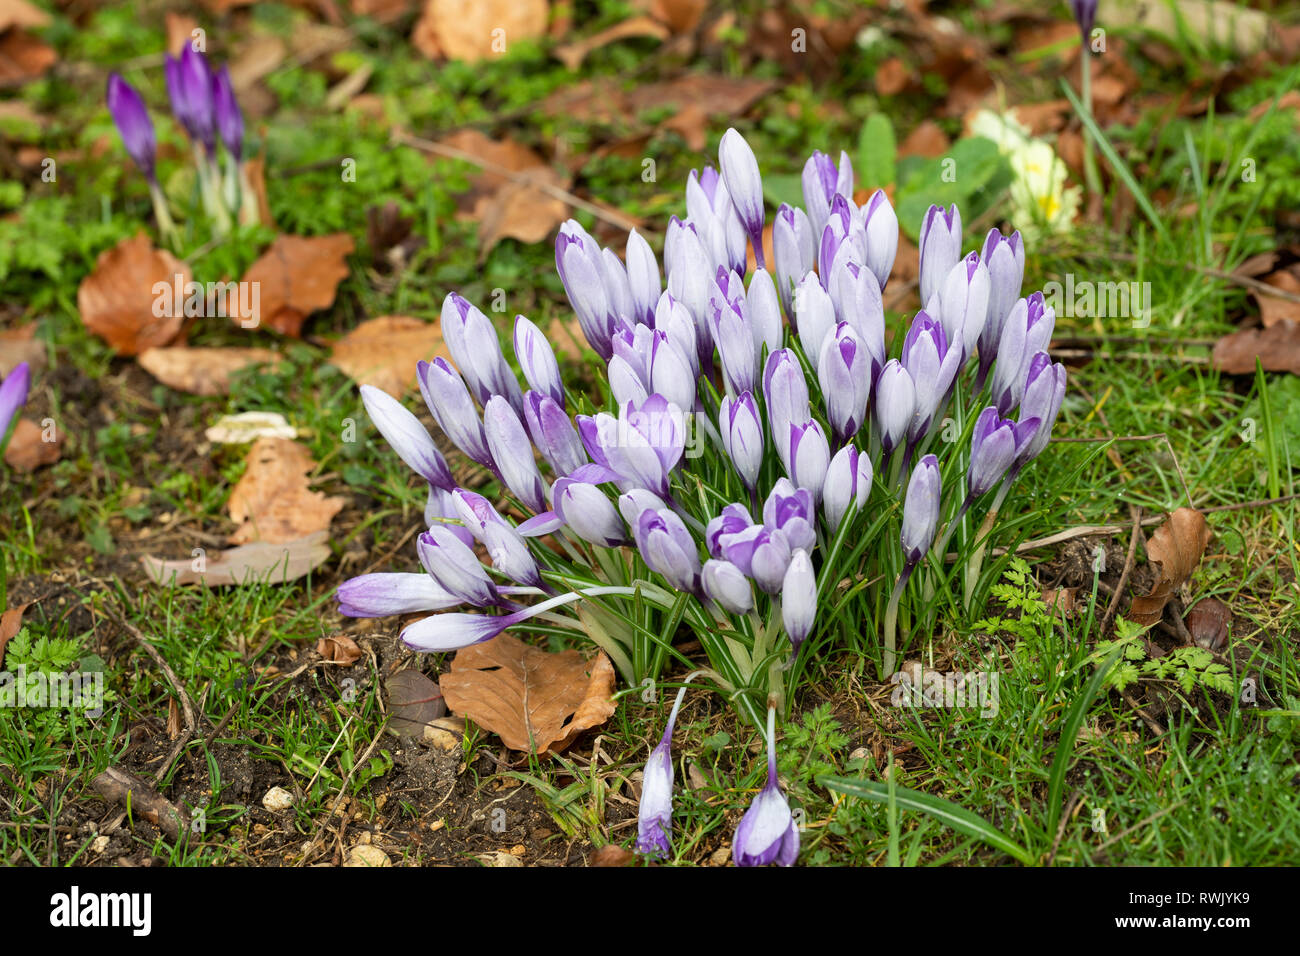 Close up of a clump of purple crocuses flowering amongst the grass in a spring garden UK Stock Photo